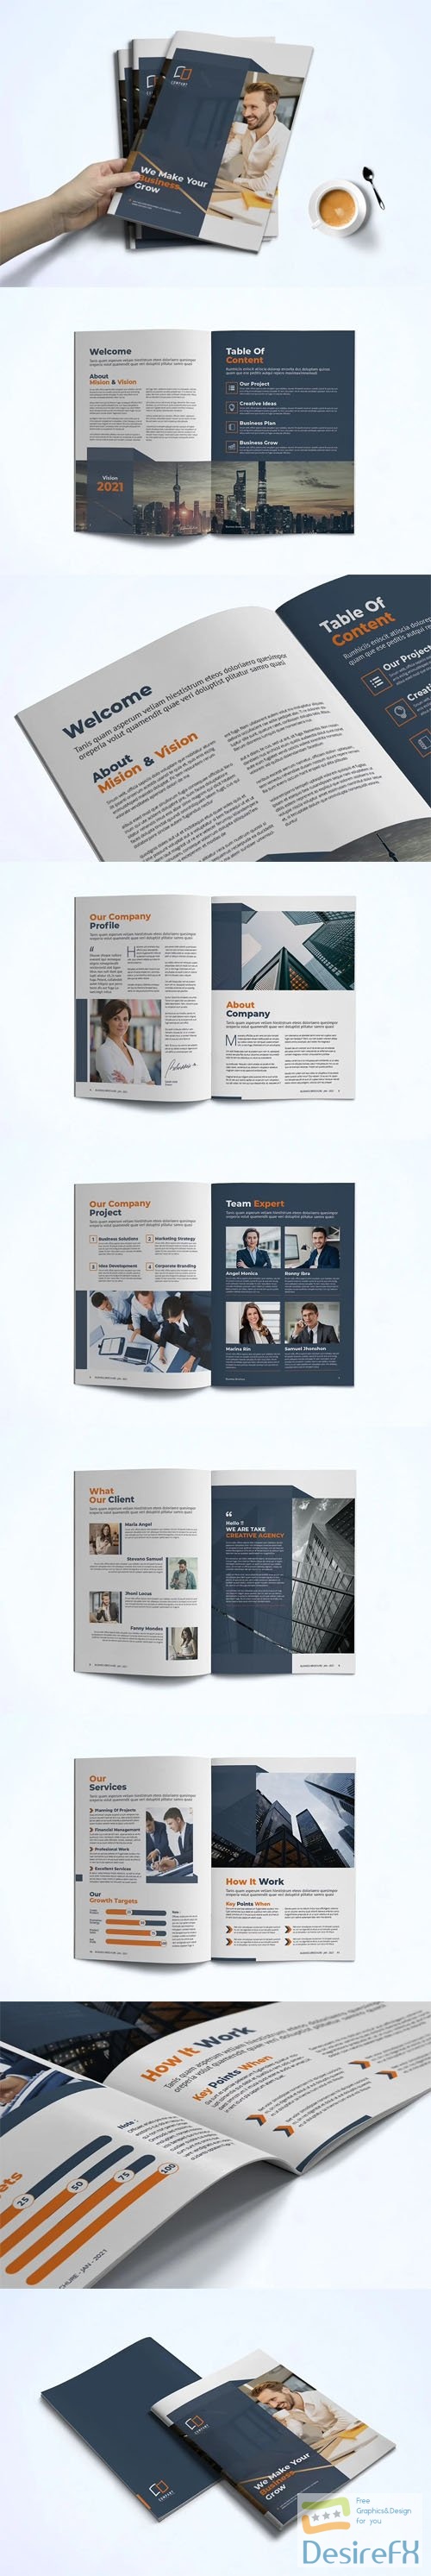 Business Brochure InDesign Template A4/US Letter